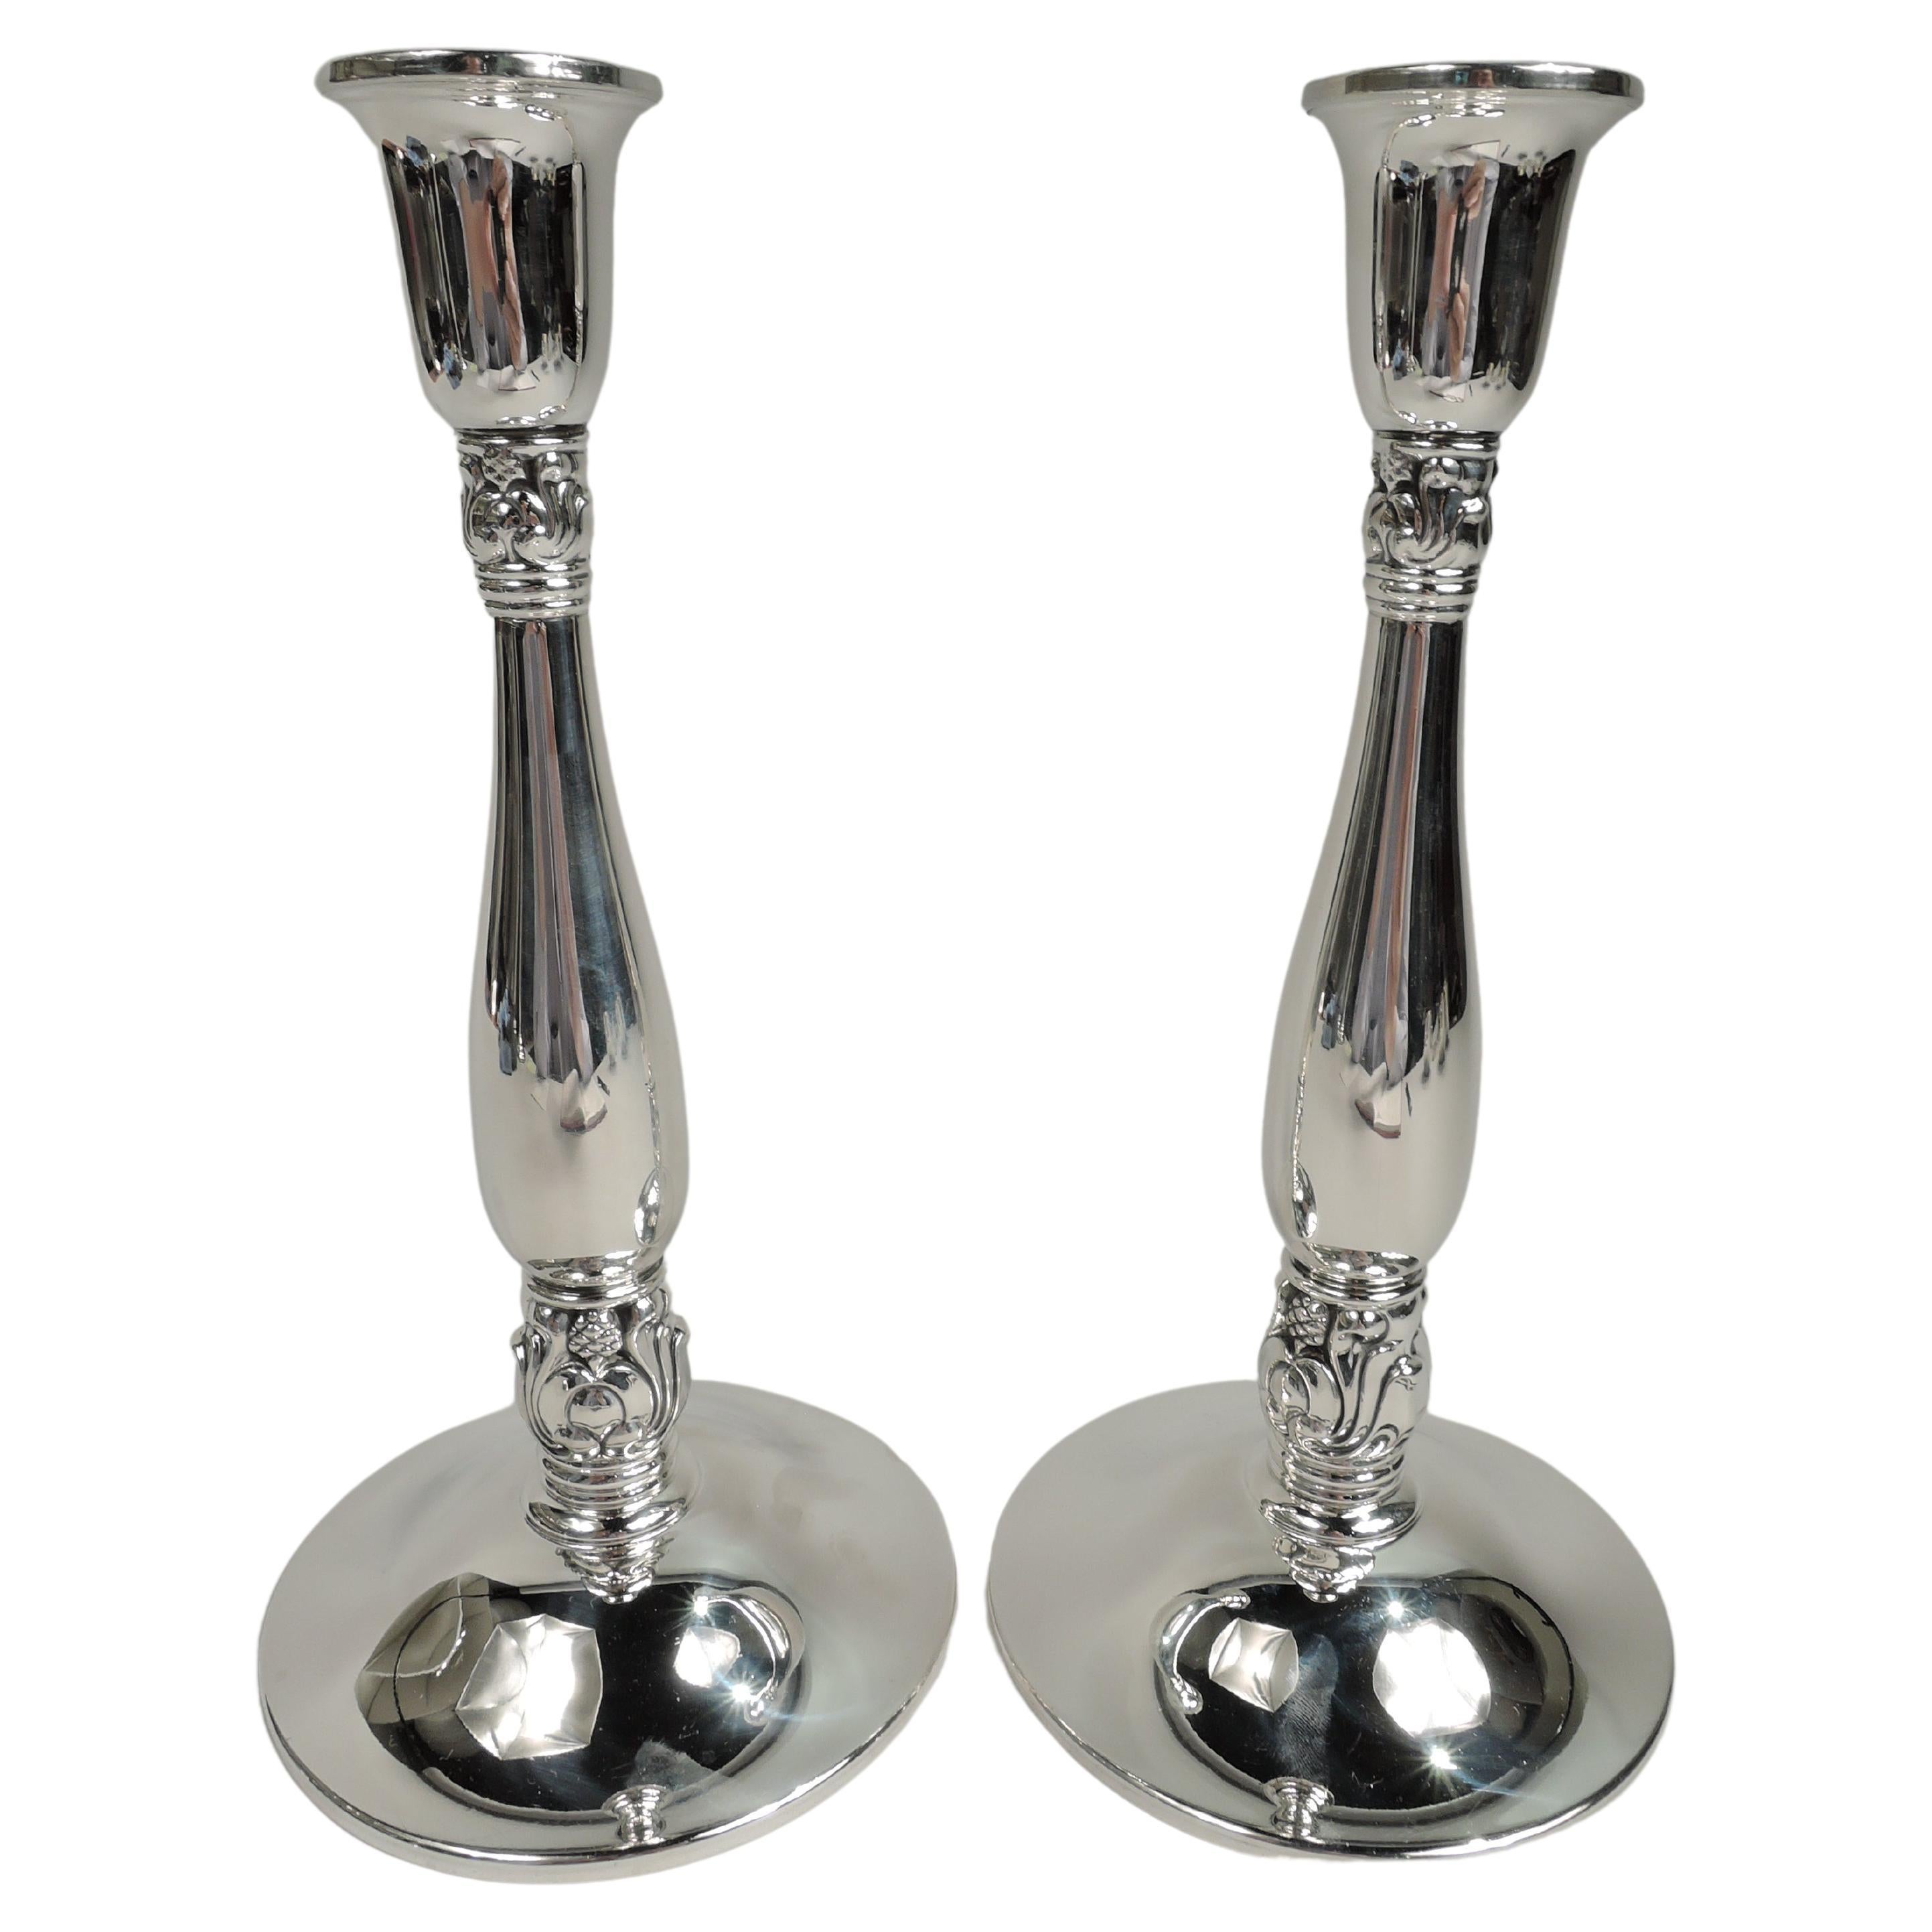 Details about   Antique Sterling Silver Candlestick by International 3 1/4" 